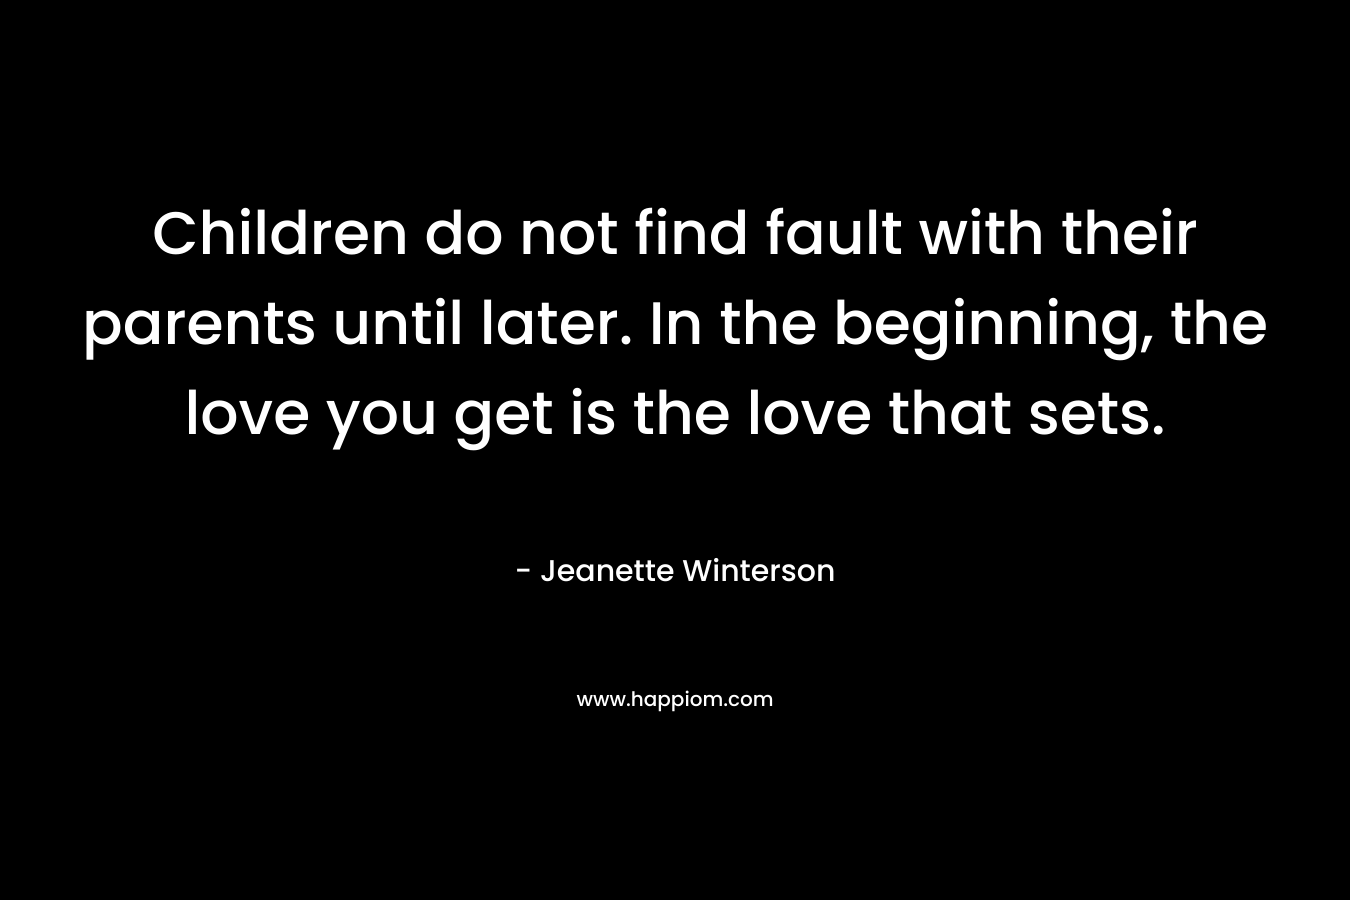 Children do not find fault with their parents until later. In the beginning, the love you get is the love that sets.